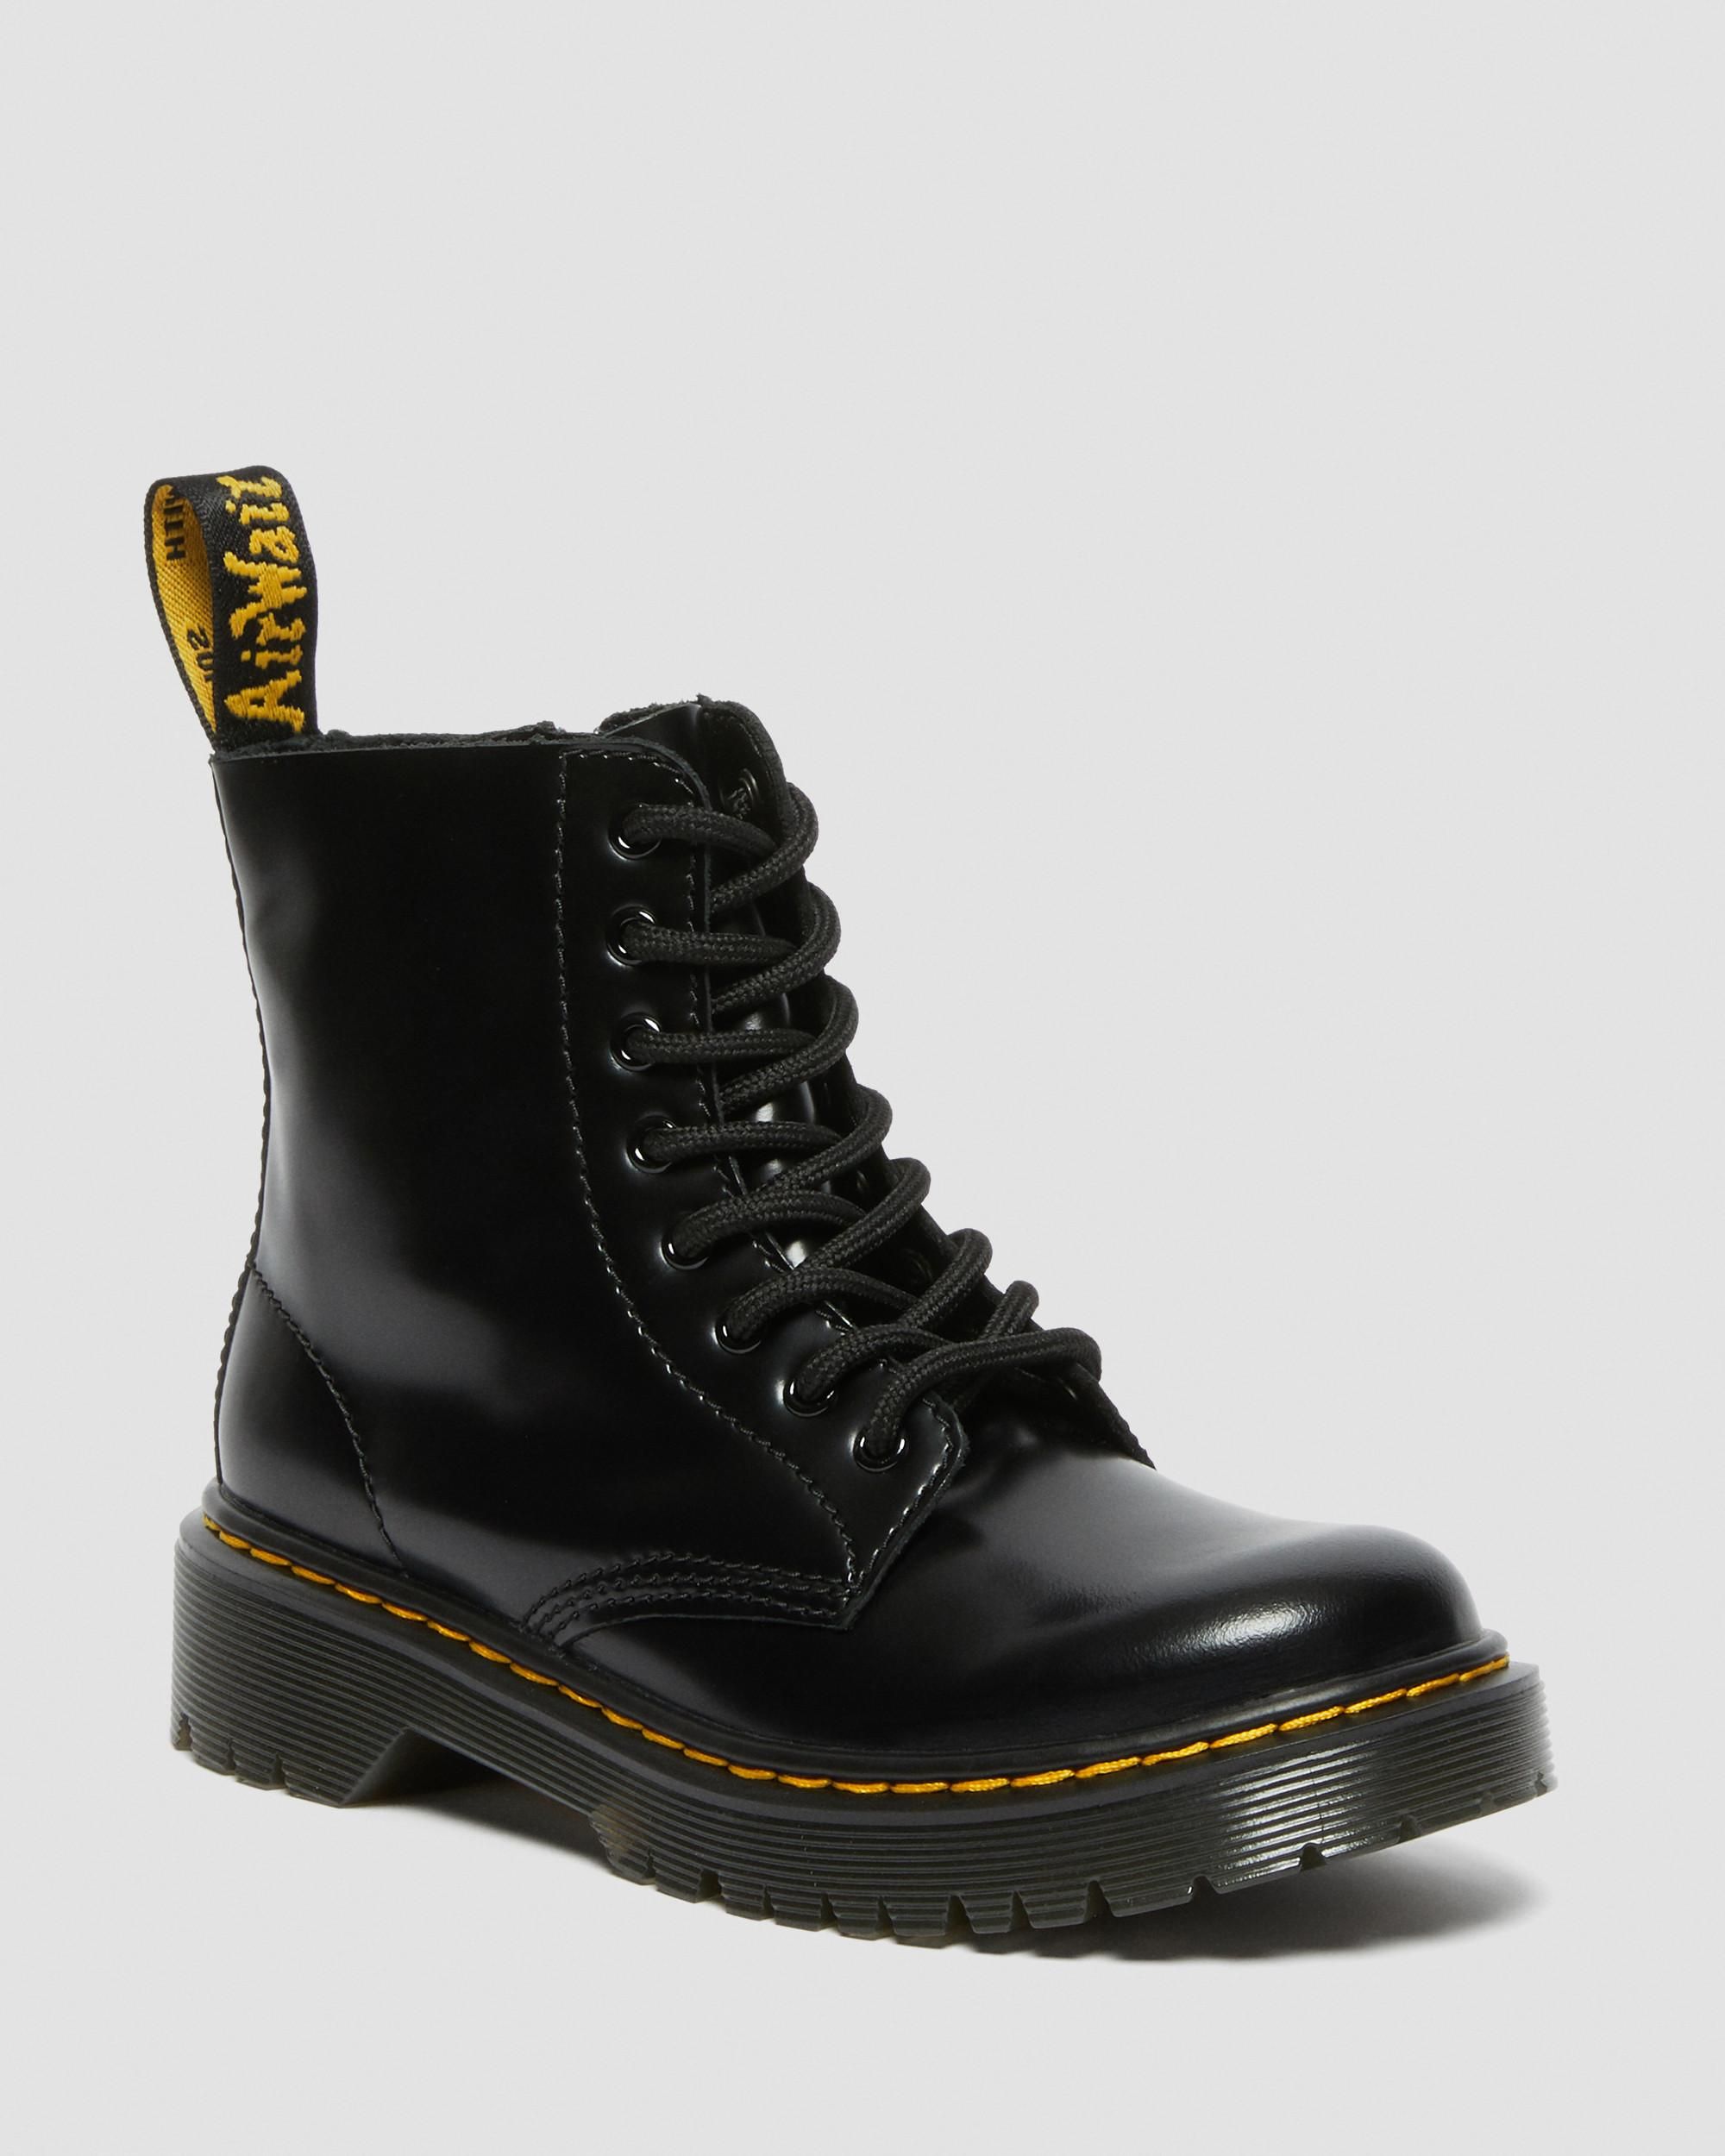 Junior 1460 Pascal Bex Leather Lace Up Boots | Dr. Martens